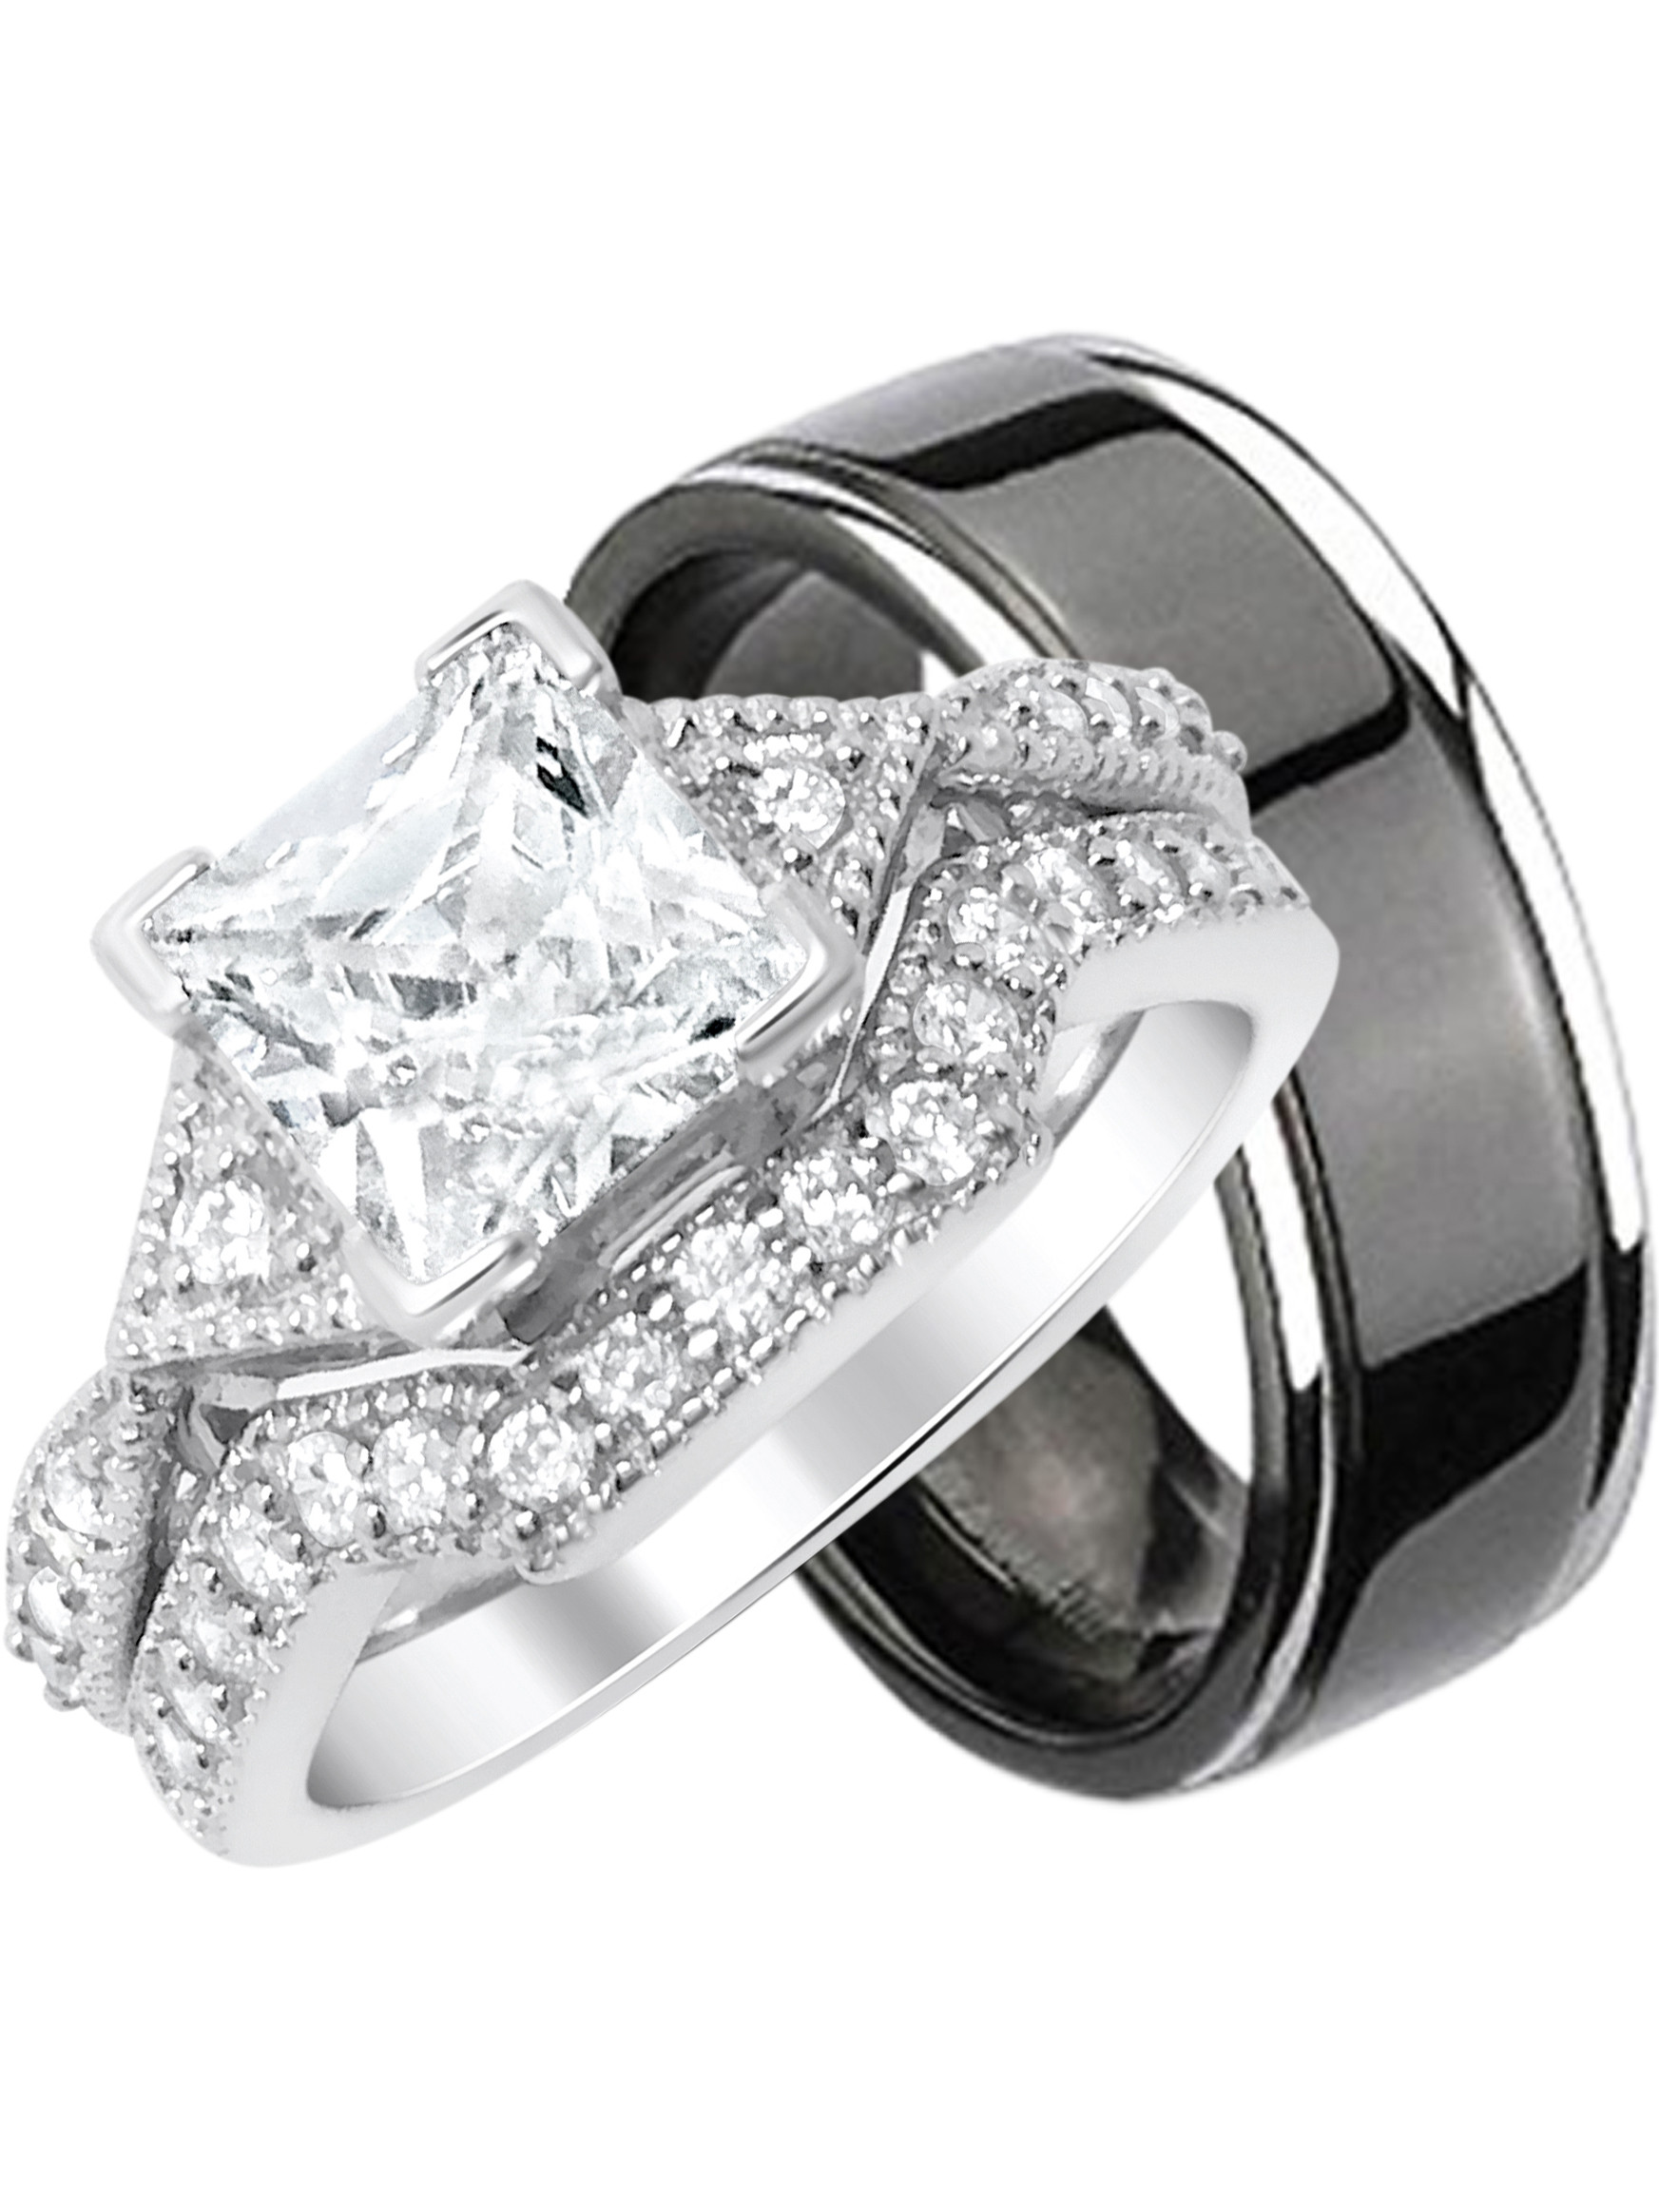 3 Piece Wedding Ring Sets For Him And Her
 LaRaso & Co His Hers 3 Piece Sterling Silver & Black